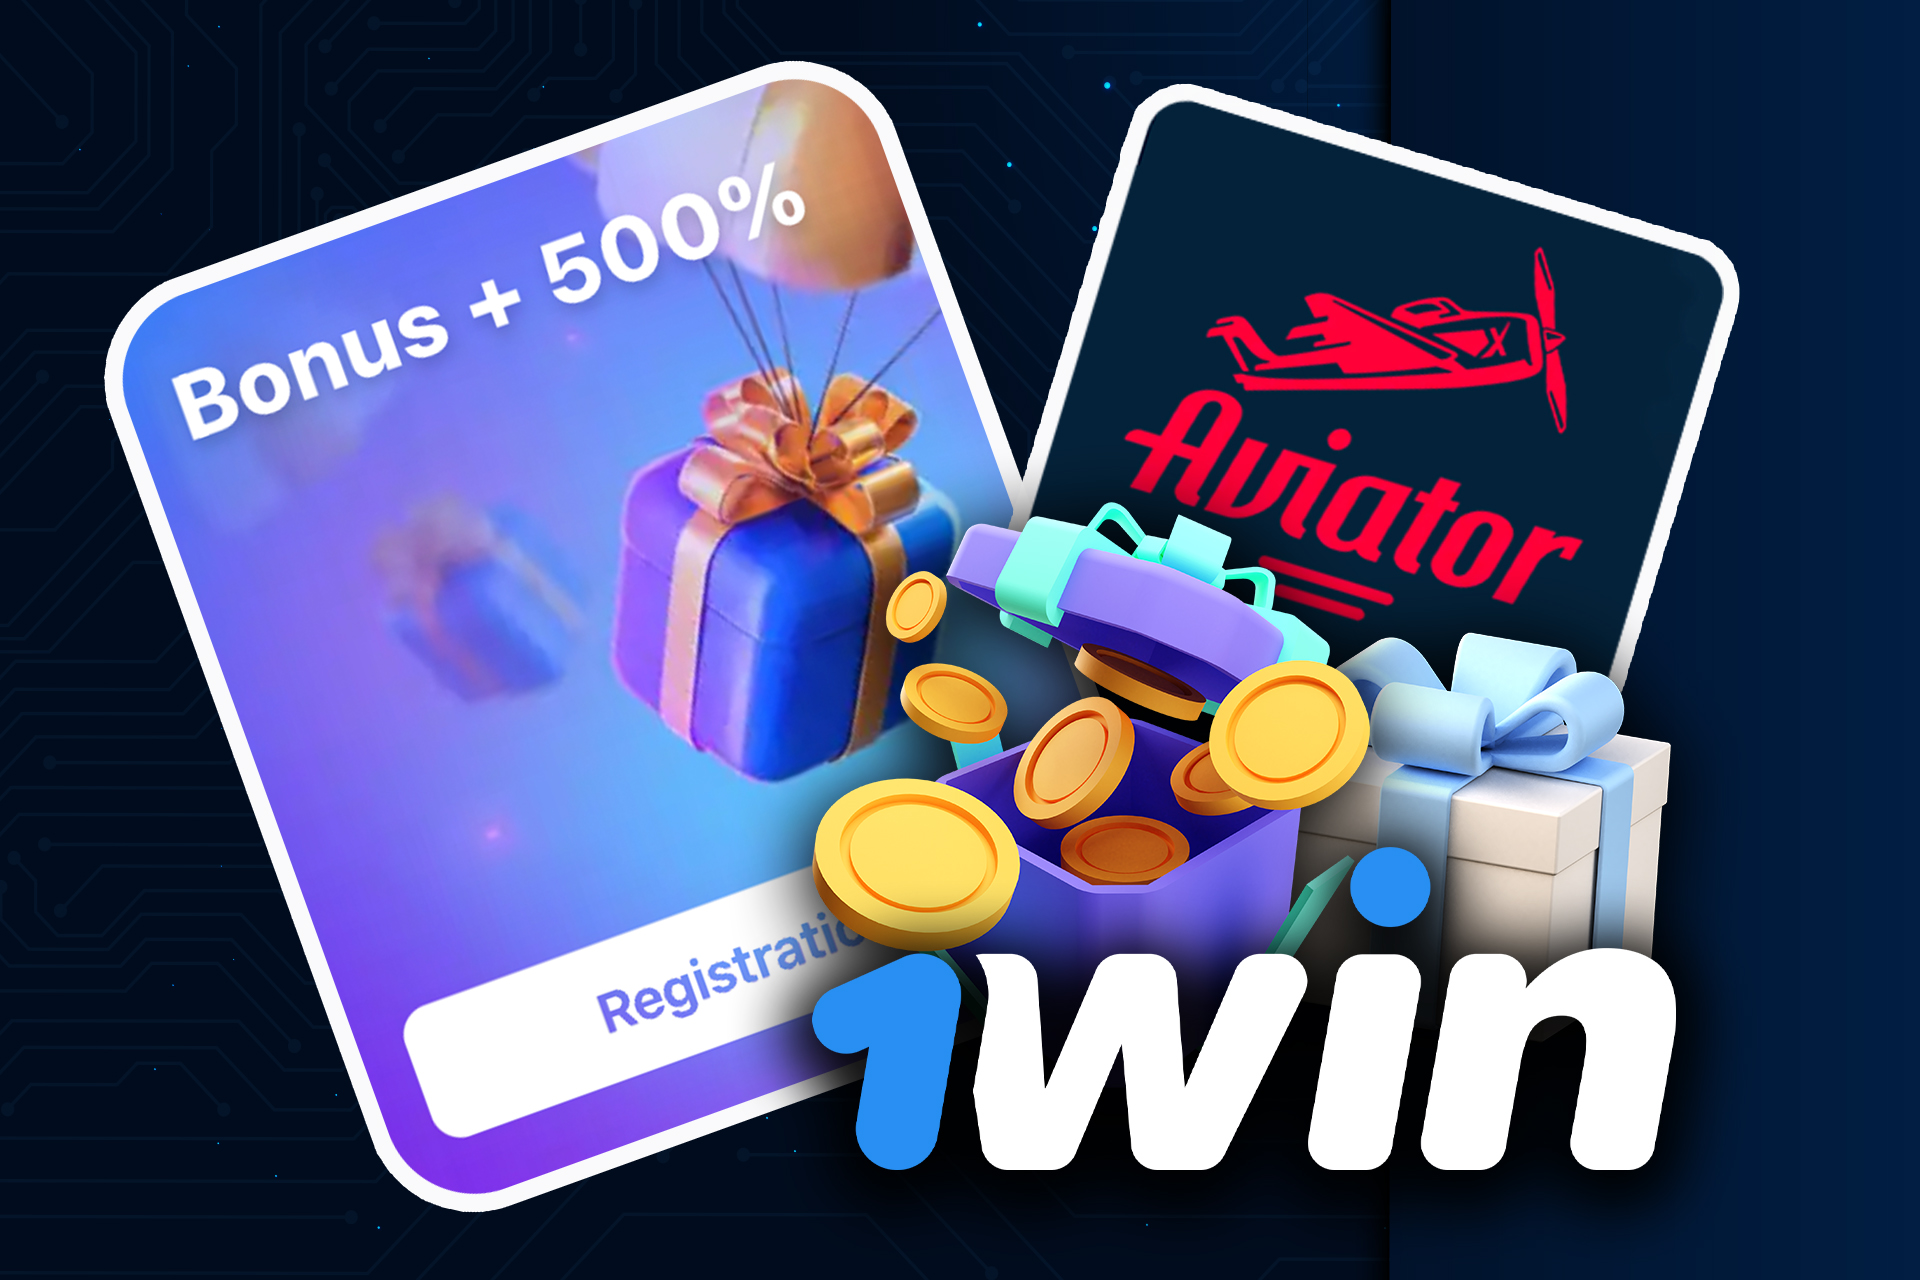 Deposit your 1win account to get a welcome bonus of 500% on Aviator.